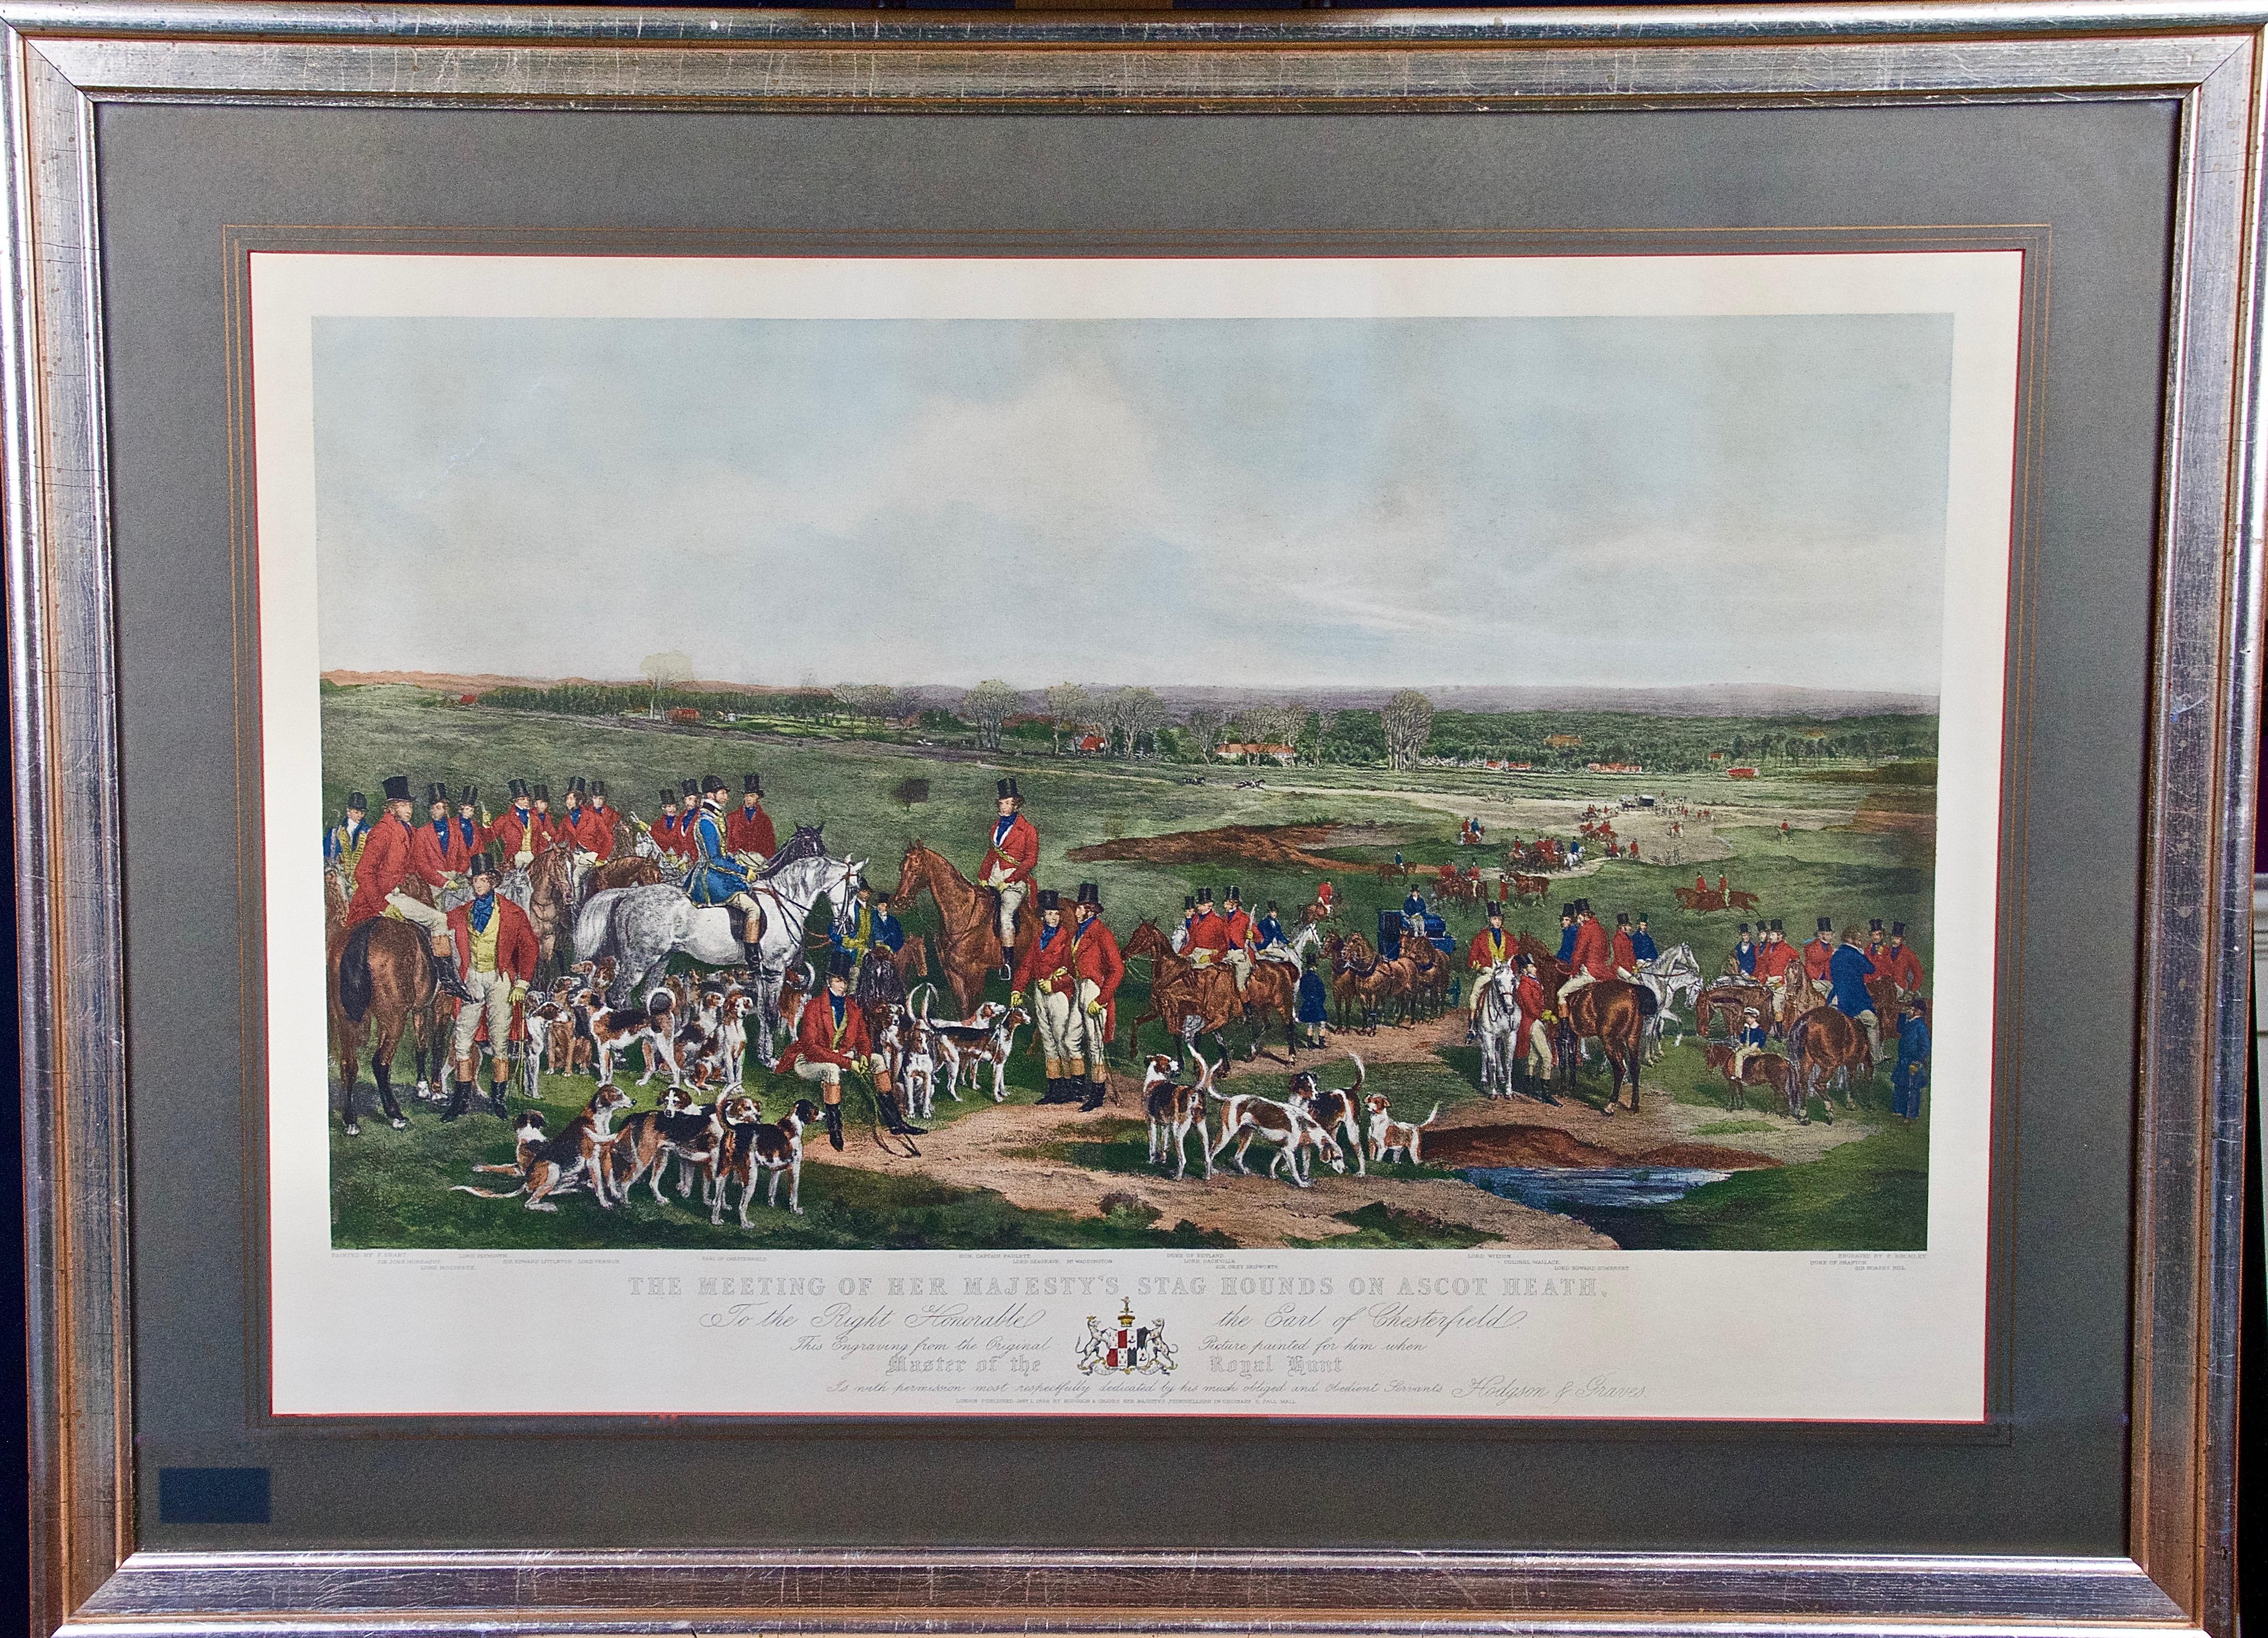 Francis Grant  Animal Print - Her Majesty's Stag Hounds on Ascot, A Colored 19th Century British Hunting Scene